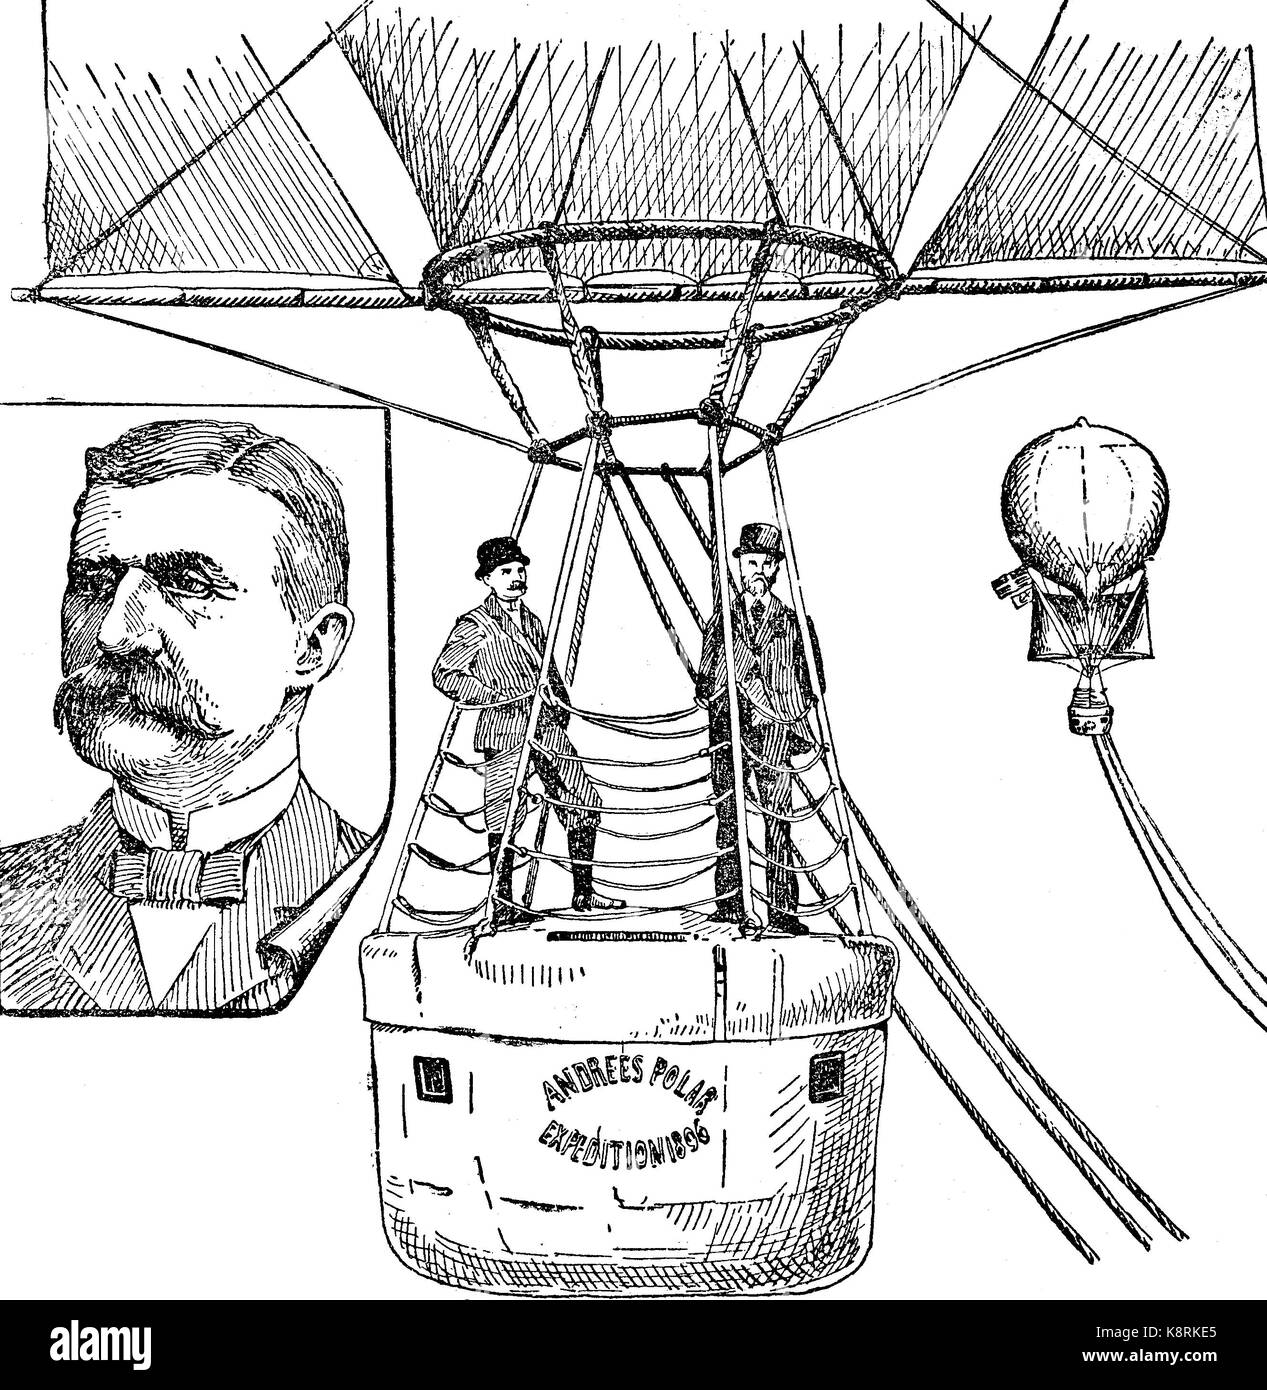 Andree Polar Expedition, Ballongondel, hydrogen balloon, Salomon August Andree a Swedish engineer, physicist, aeronaut and polar explorer, digital improved reproduction of a woodcut, published in the 19th century Stock Photo